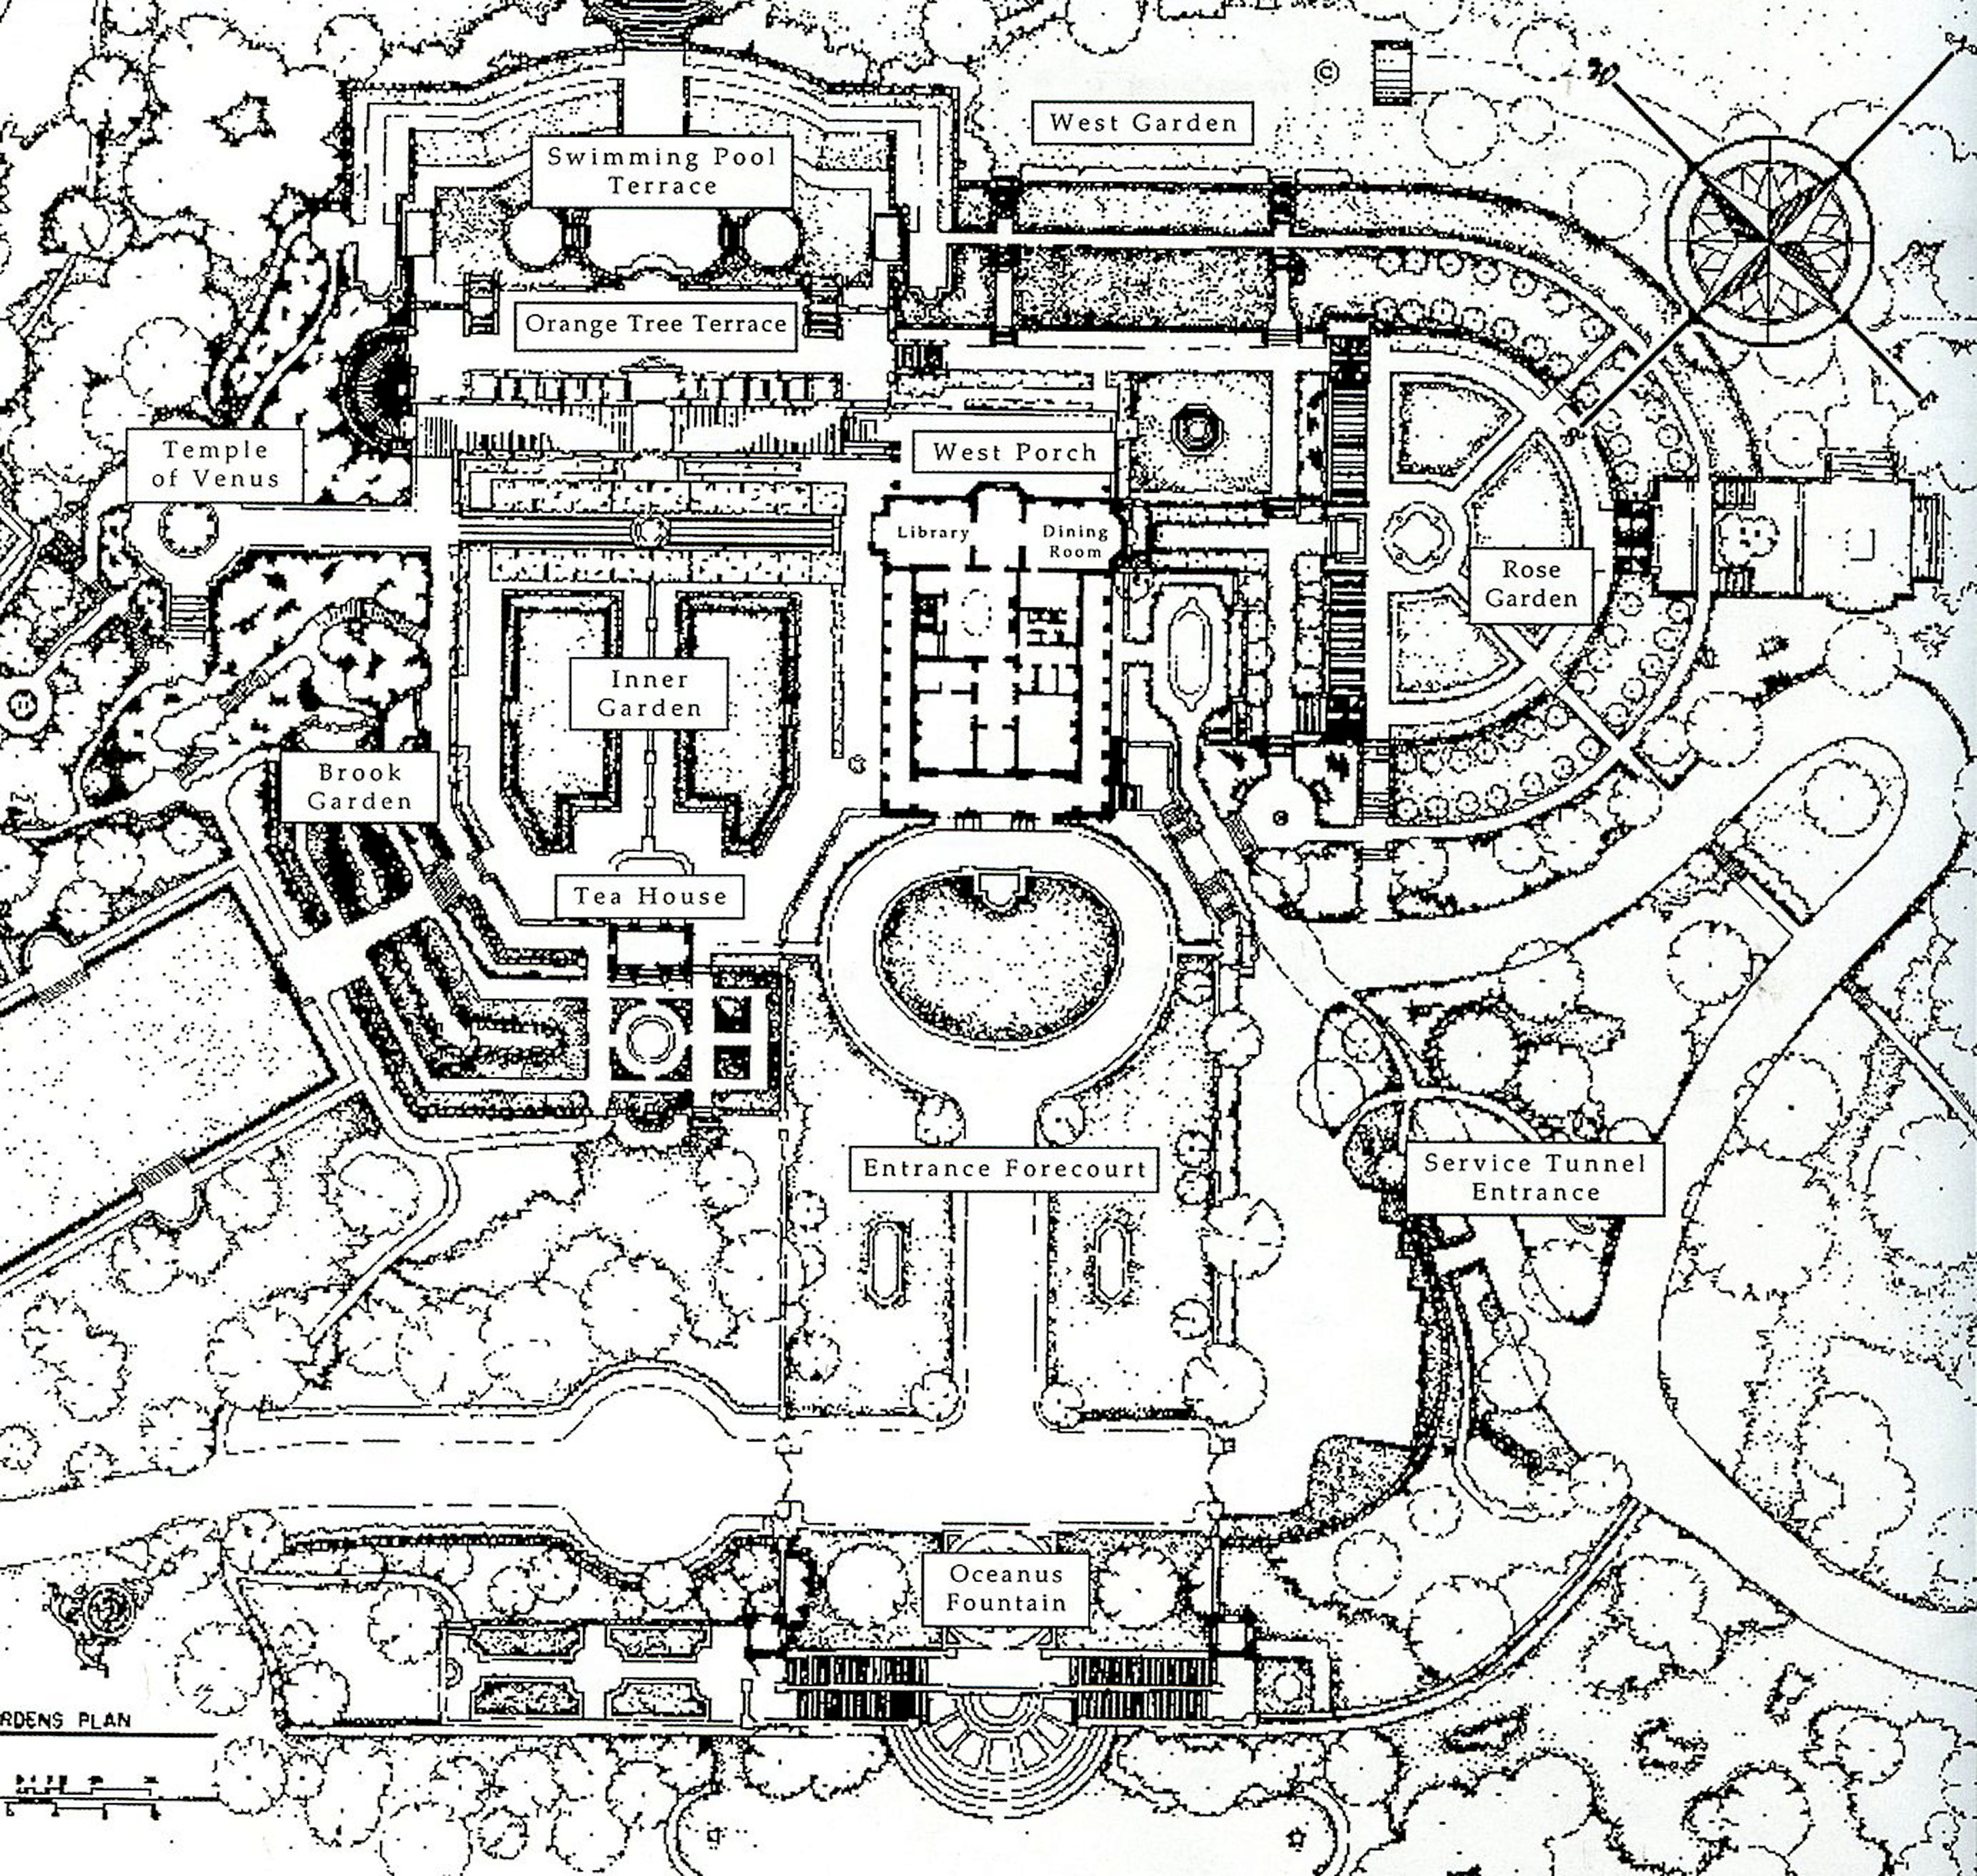 Garden plan of Kykuit with the house in the center.  The gardens were designed by William Welles Bosworth.